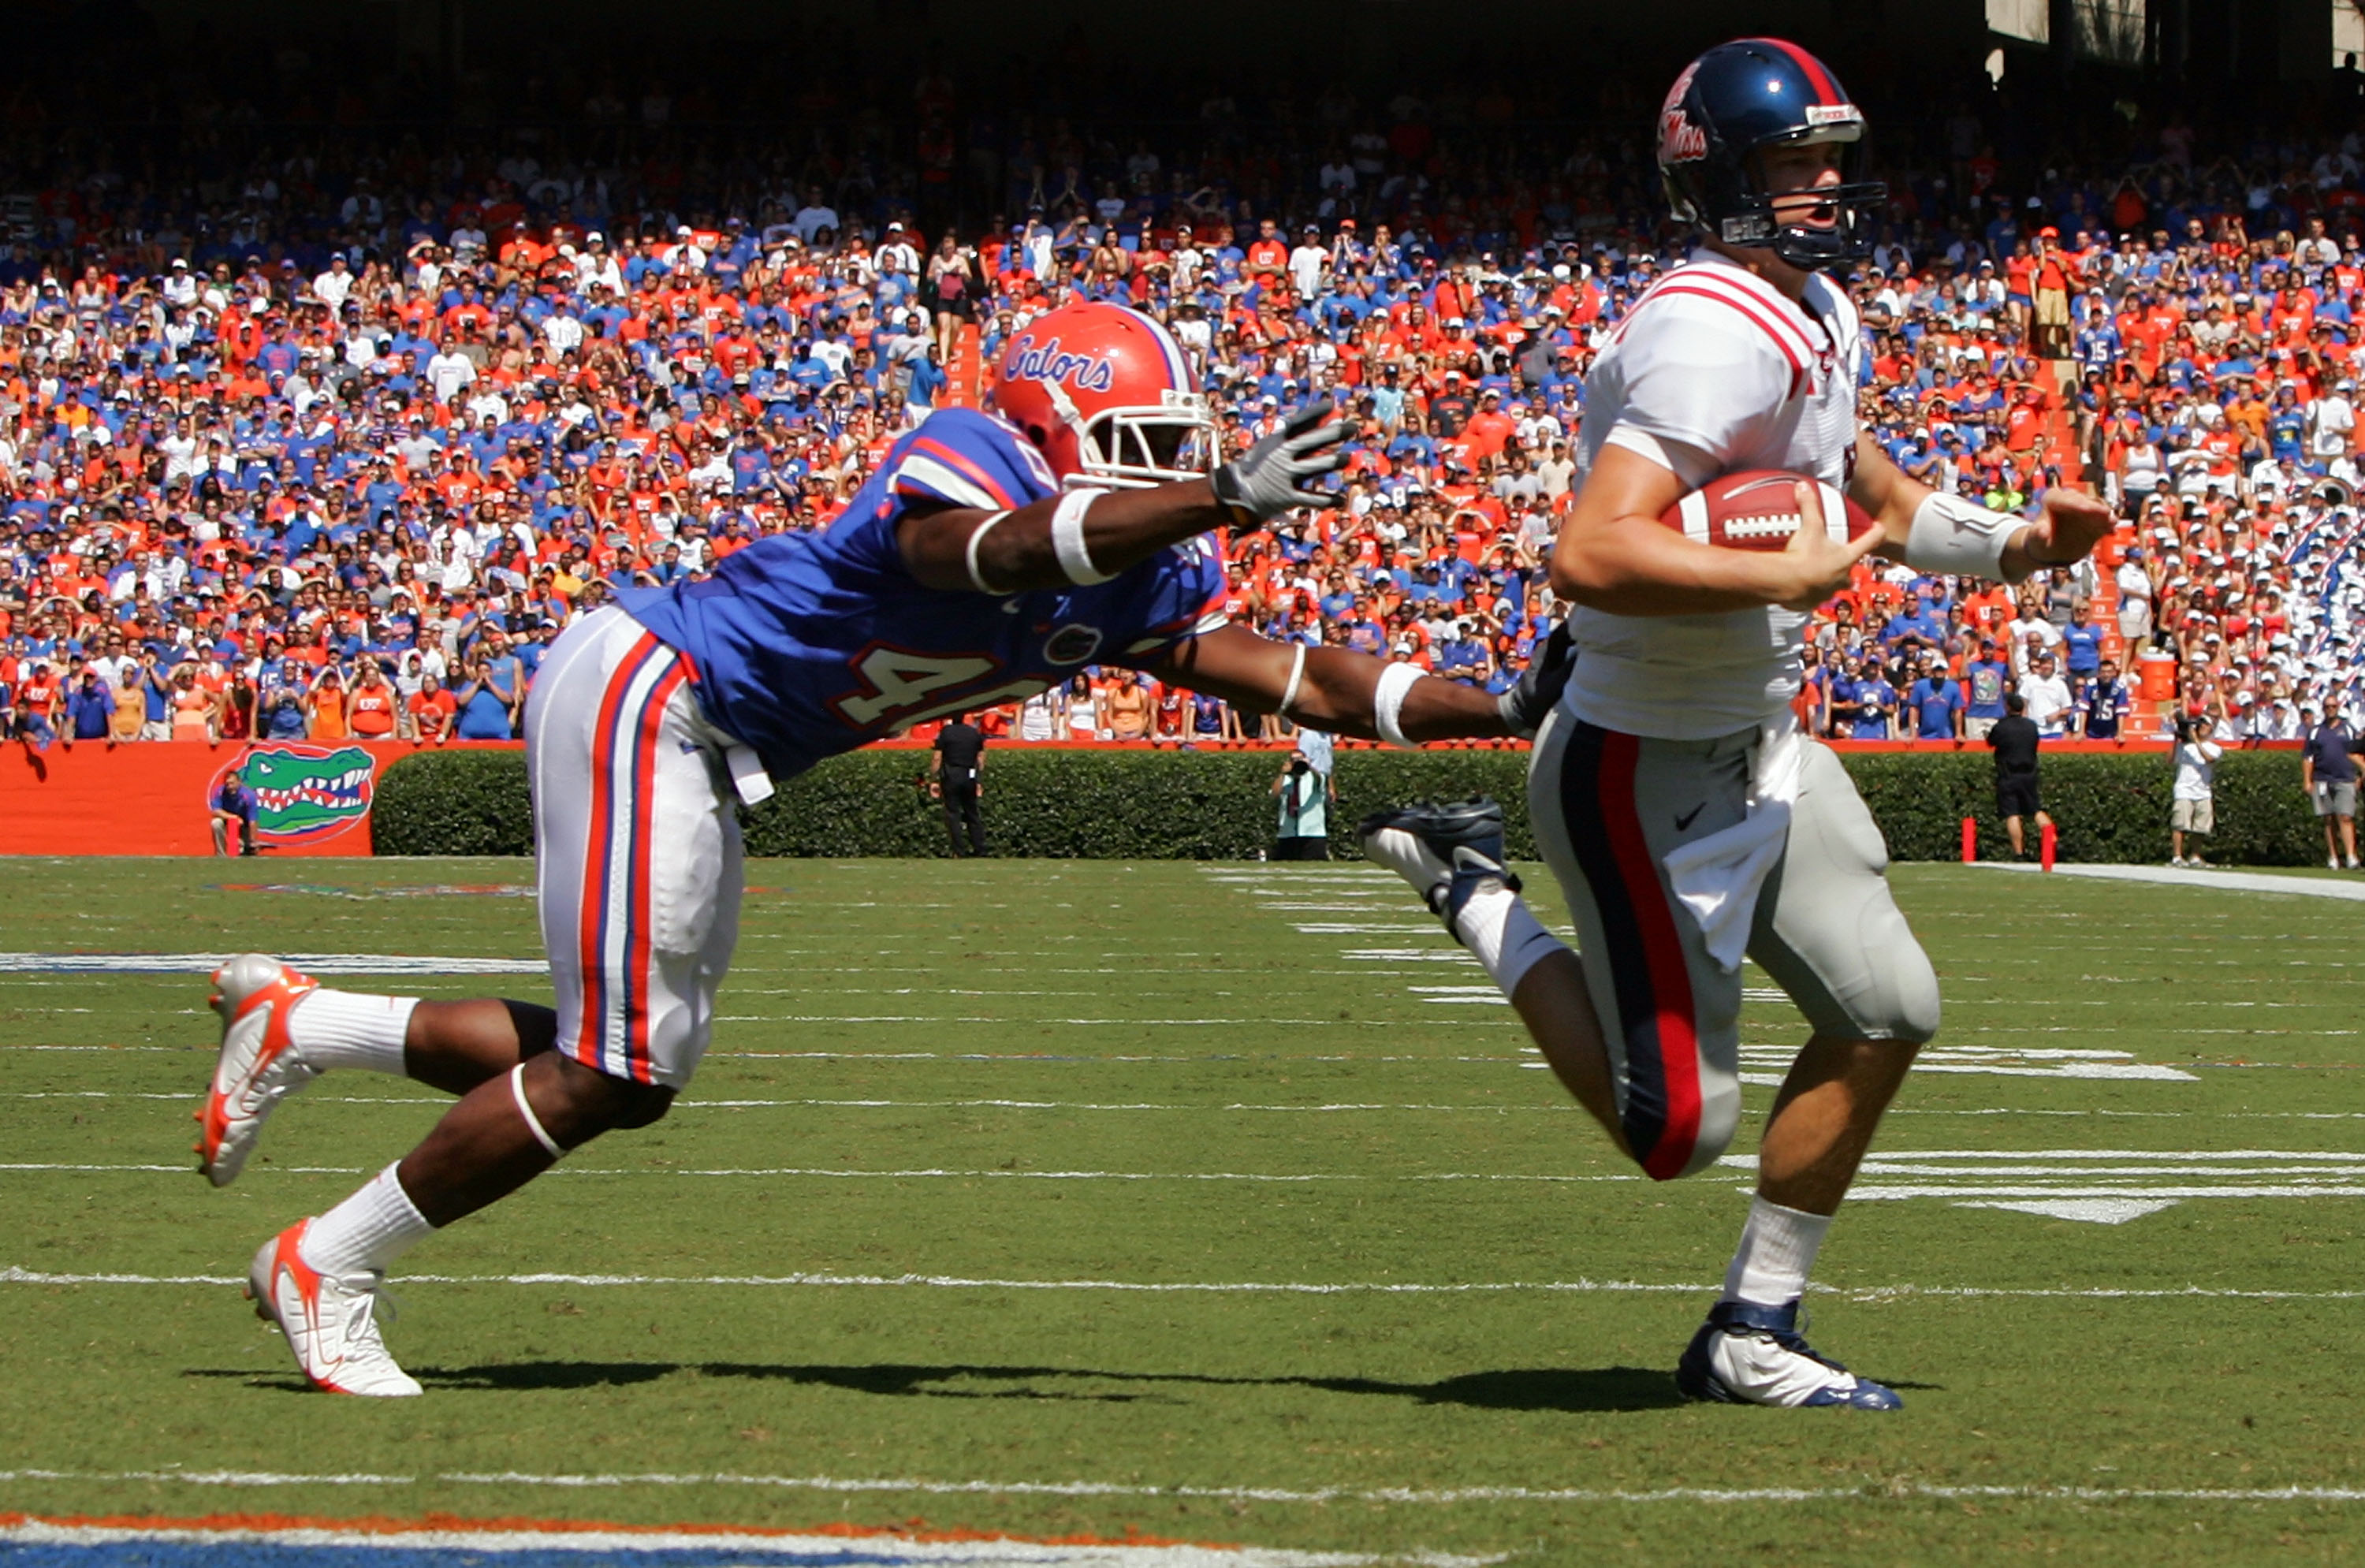 GAINESVILLE, FL - SEPTEMBER 27:  Quarterback Jevan Snead #4 of the Ole Miss Rebels runs for a touchdown against Brnadon Hicks #40 of the Florida Gators during the game at Ben Hill Griffin Stadium on September 27, 2008 in Gainesville, Florida.  (Photo by S